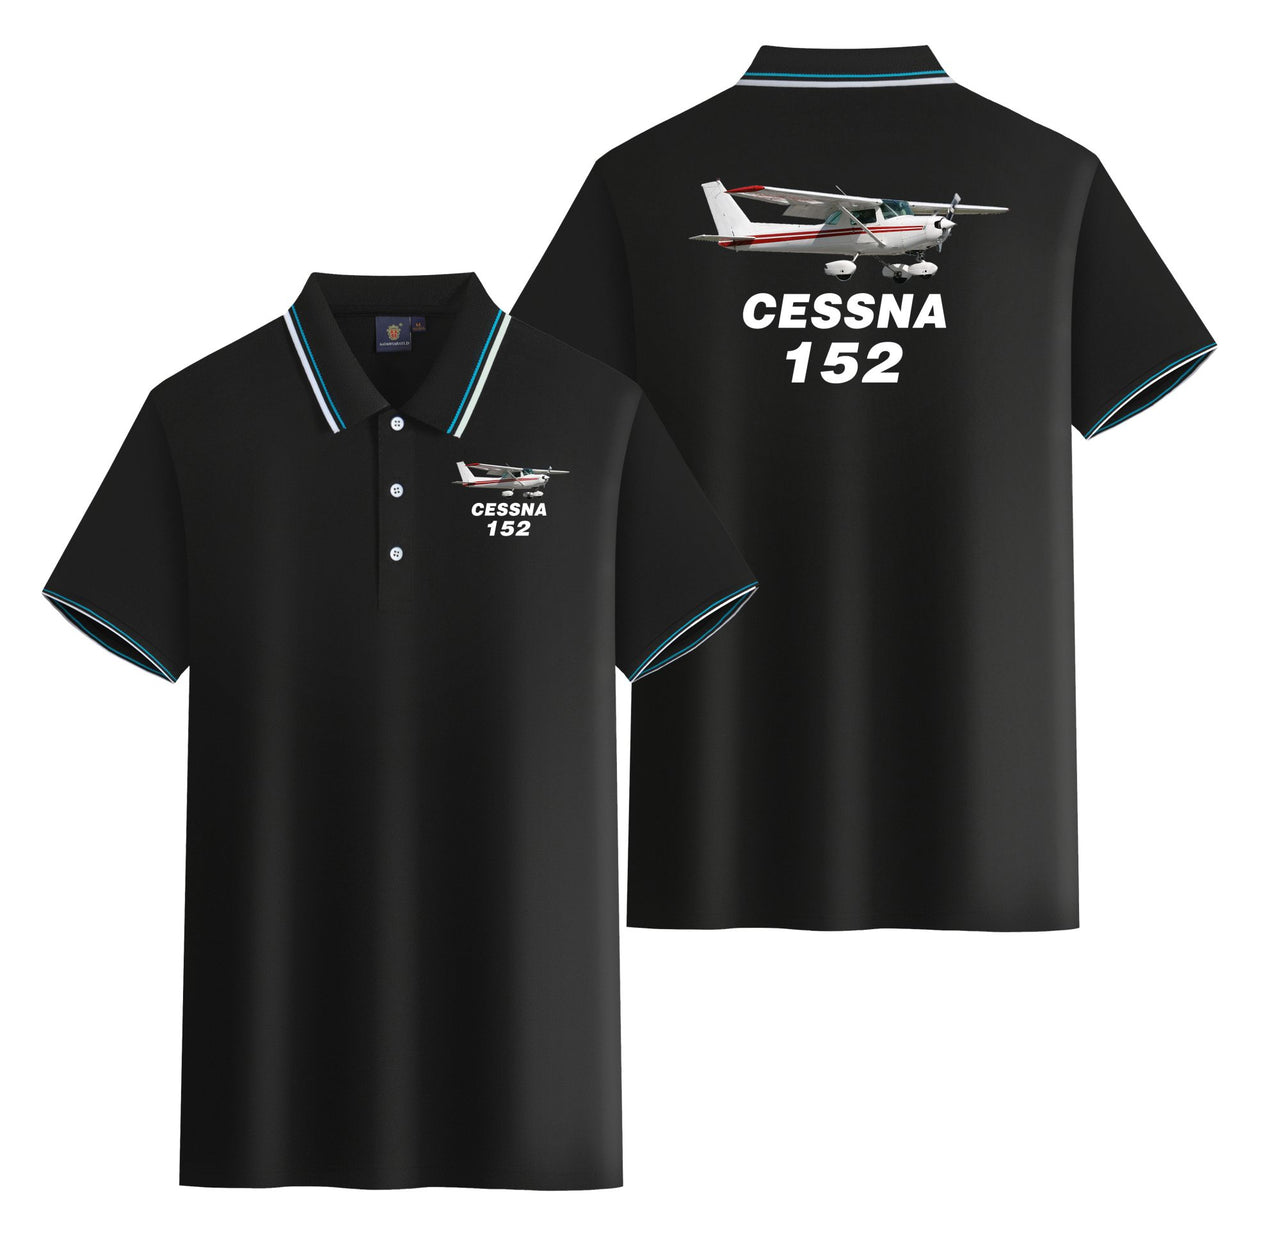 The Cessna 152 Designed Stylish Polo T-Shirts (Double-Side)